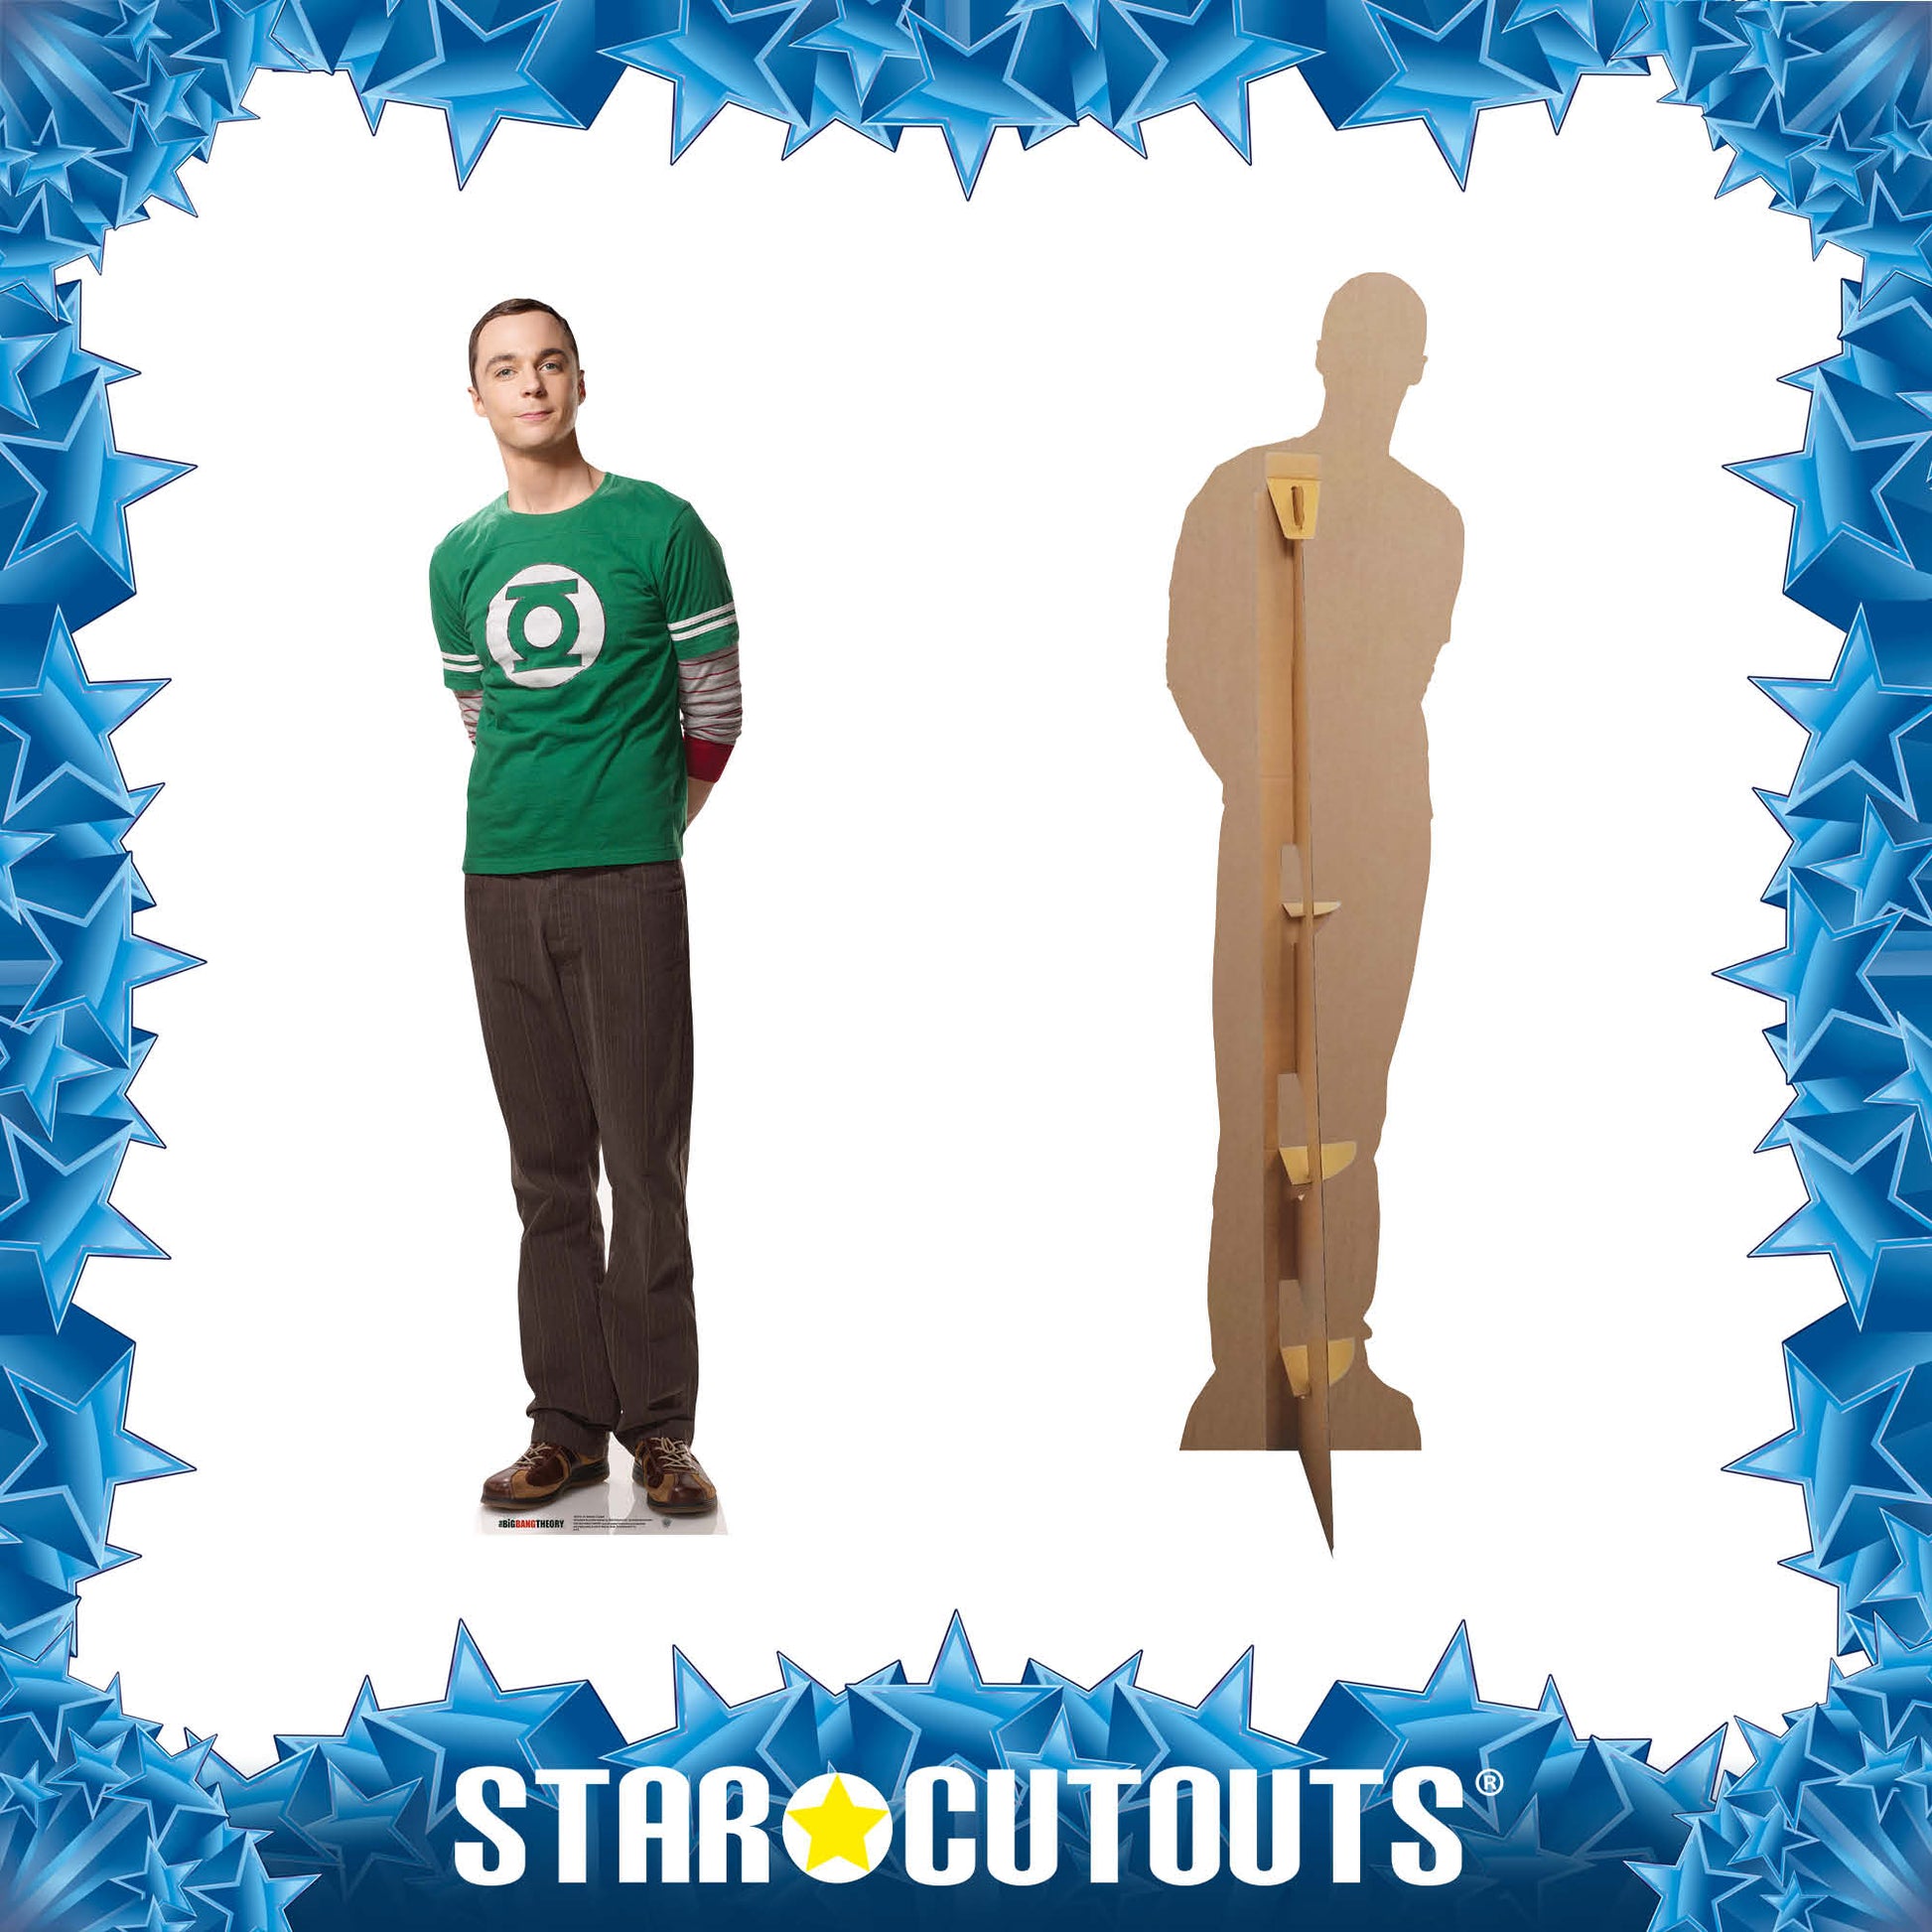 SC618 Doctor Sheldon Cooper The Big Bang Theory Cardboard Cut Out Height 185cm - Star Cutouts